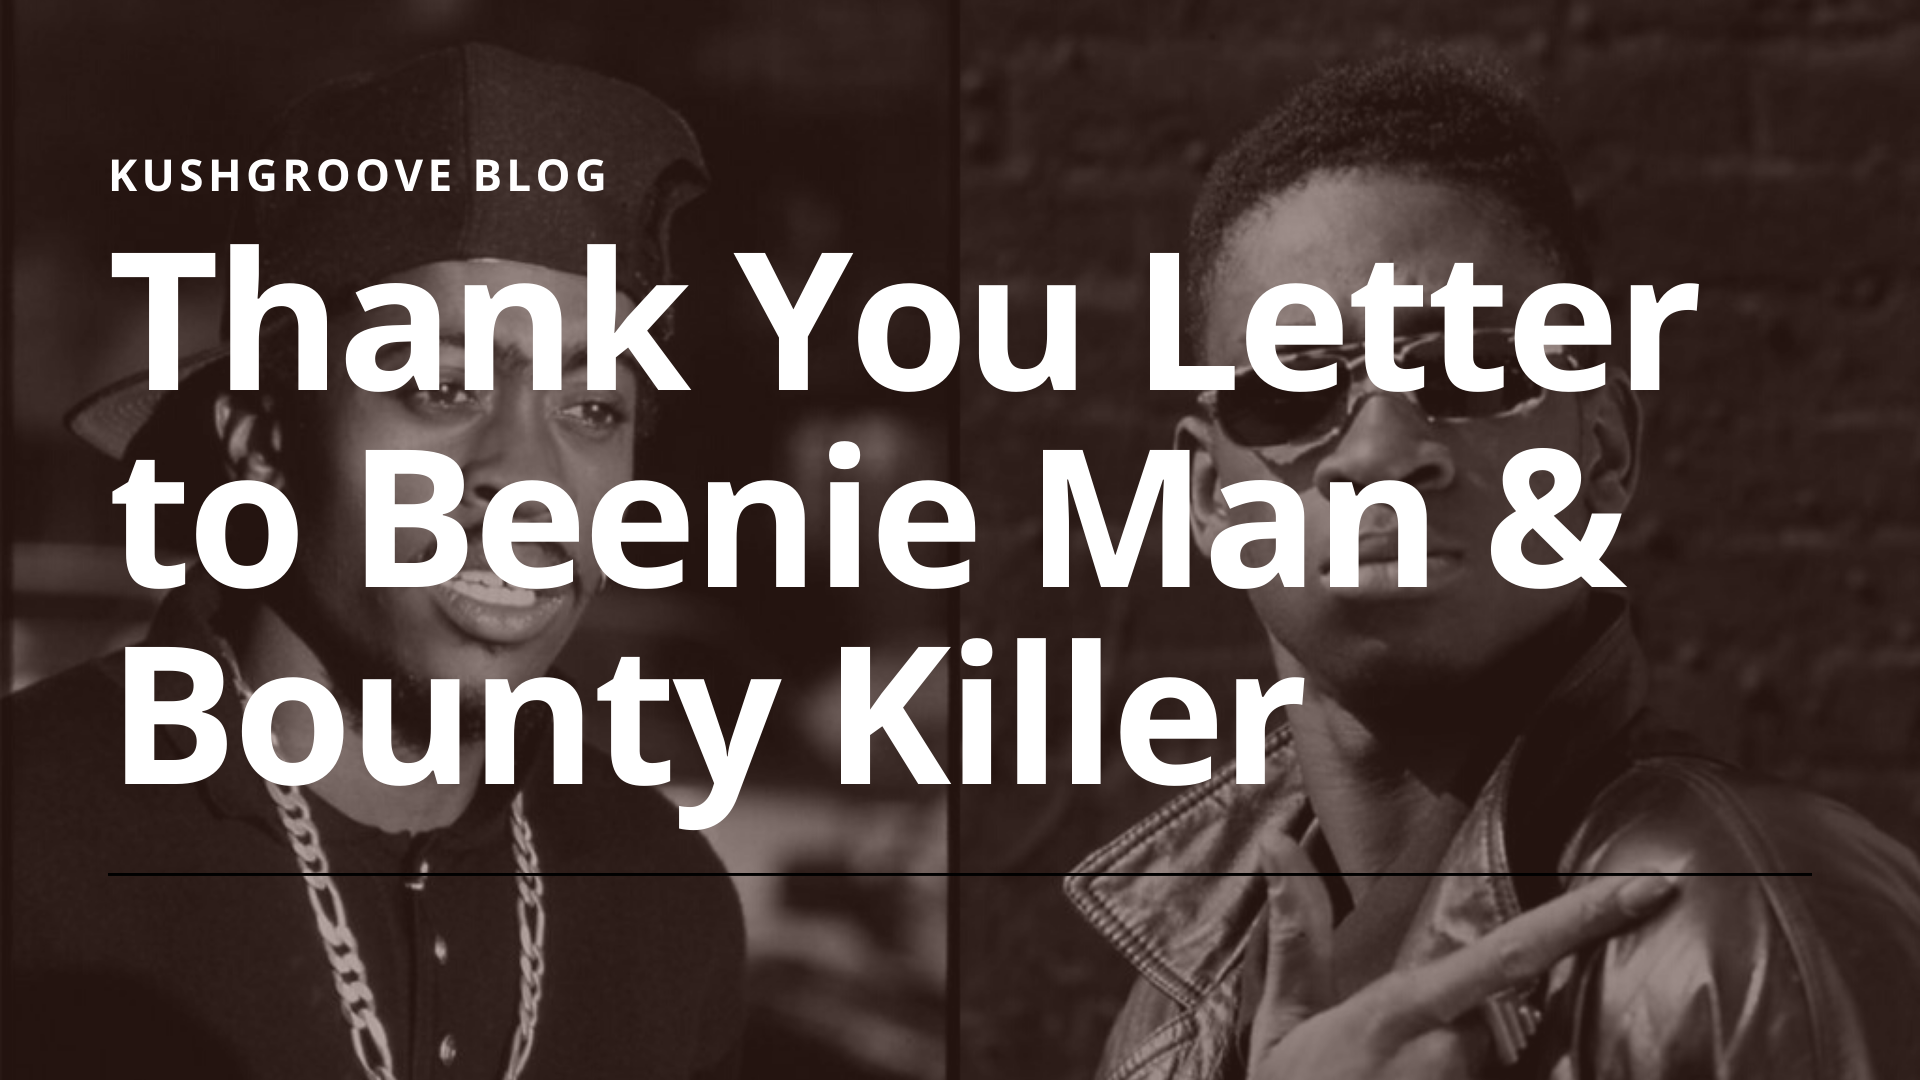 Thank You Letter to Beenie Man & Bounty Killer